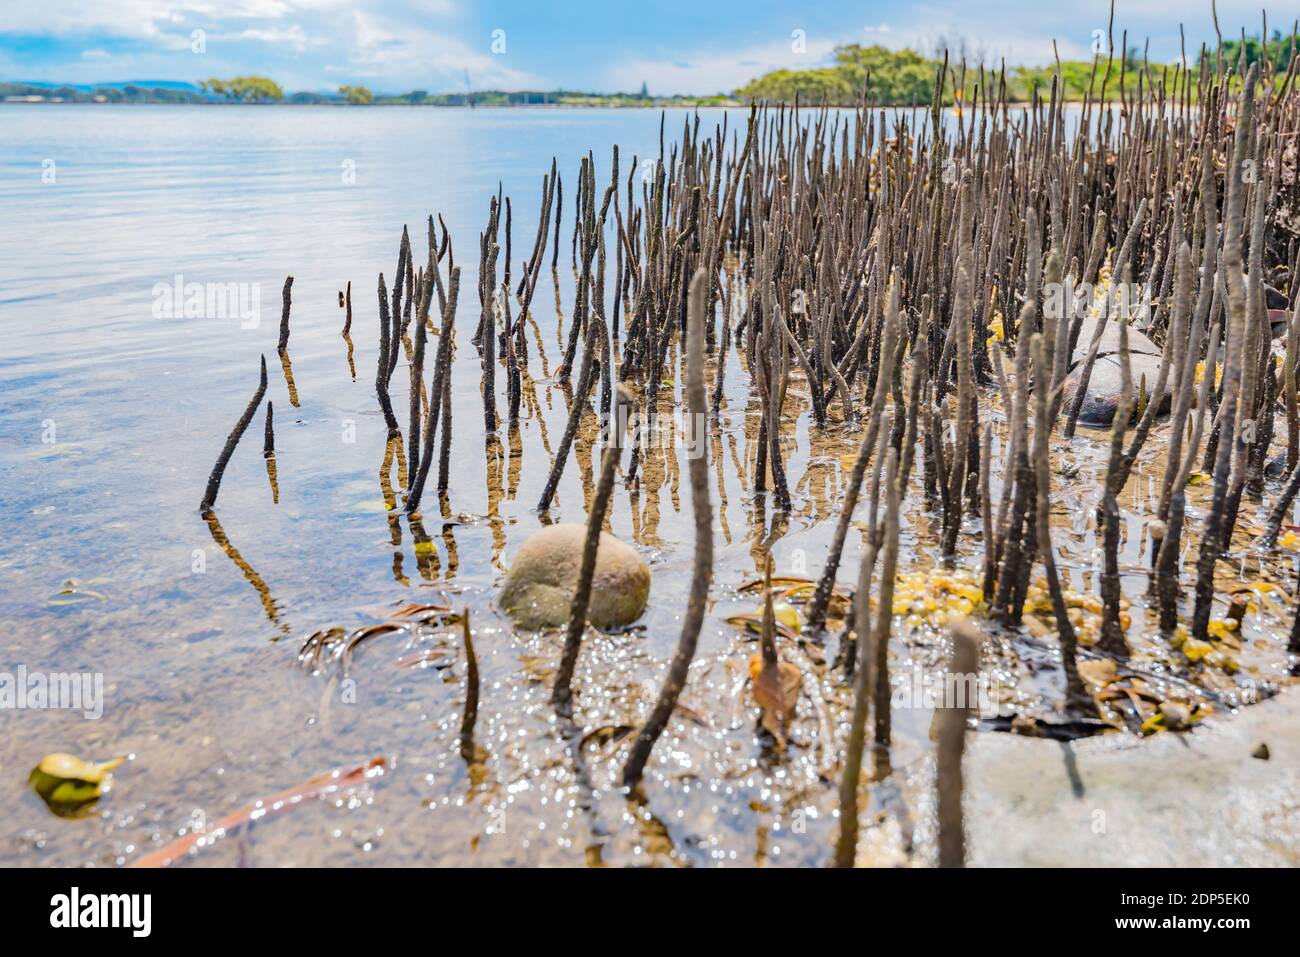 River Mangroves (Aegiceras corniculatum) exposed by the low tide on the banks of the Coolongolook River near Forster, New South Wales, Australia Stock Photo